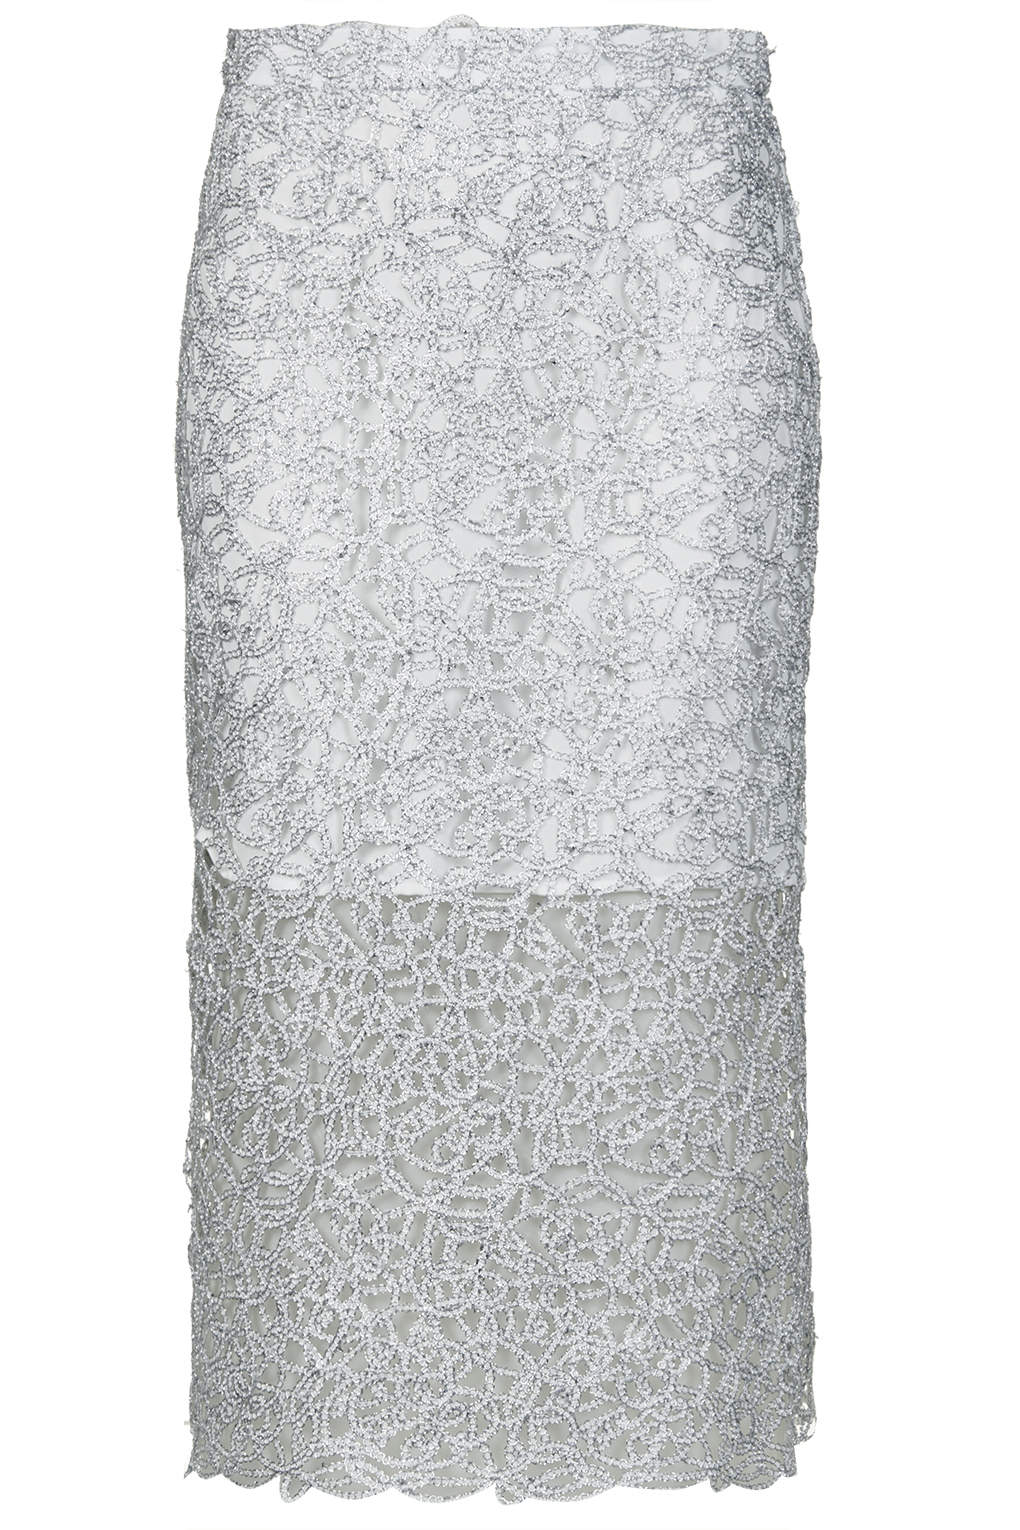 Lyst - Topshop Limited Edition Silver Cornelli Pencil Skirt in Metallic